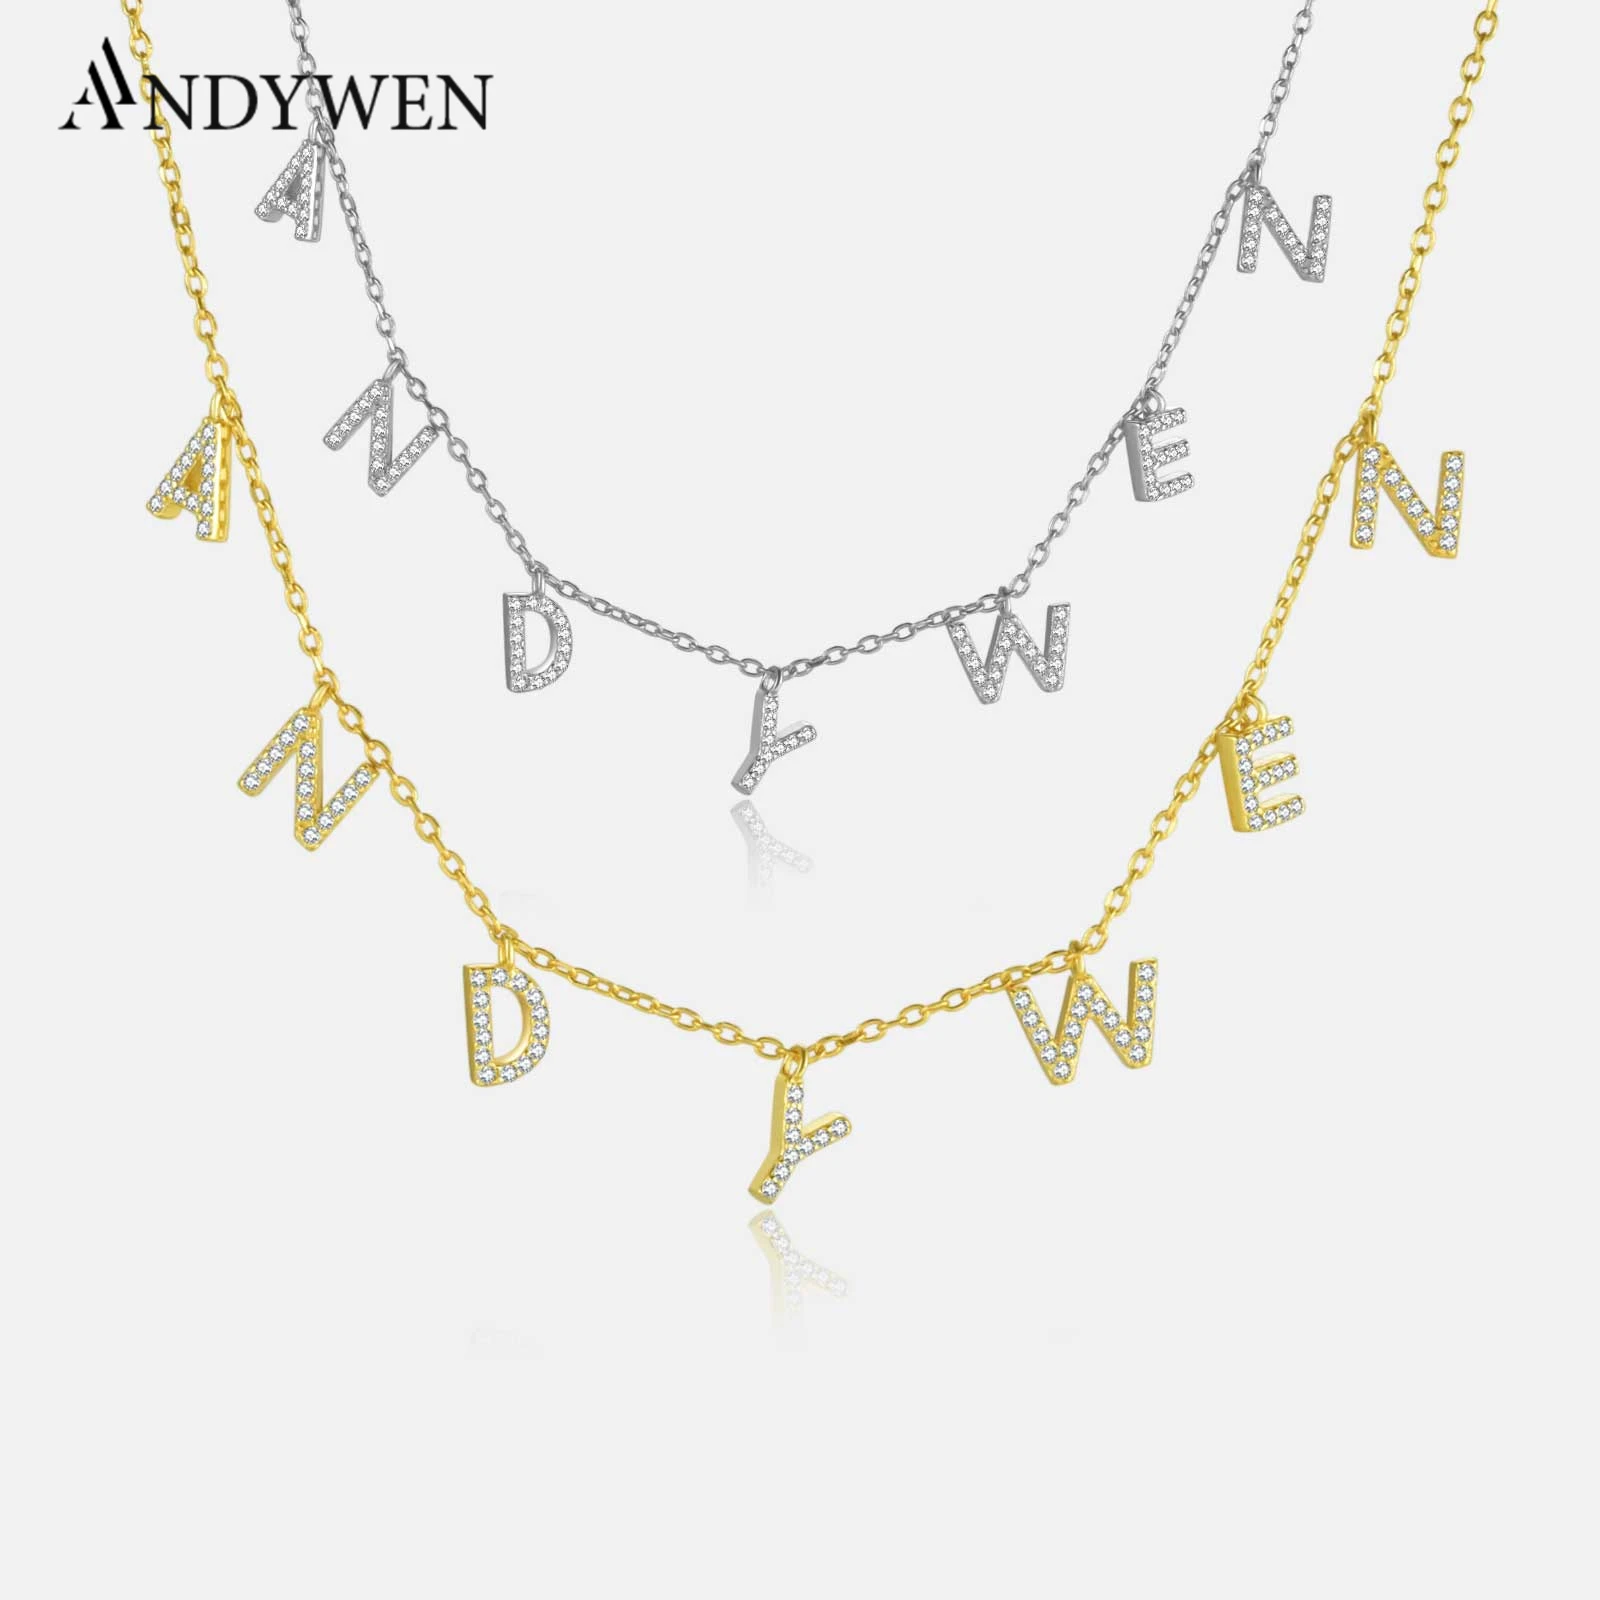 ANDYWEN 925 Sterling Silver Gold Personalized Name Pendant Necklace Alpahbet Birthday Gift Valentiens European Initial Jewelry